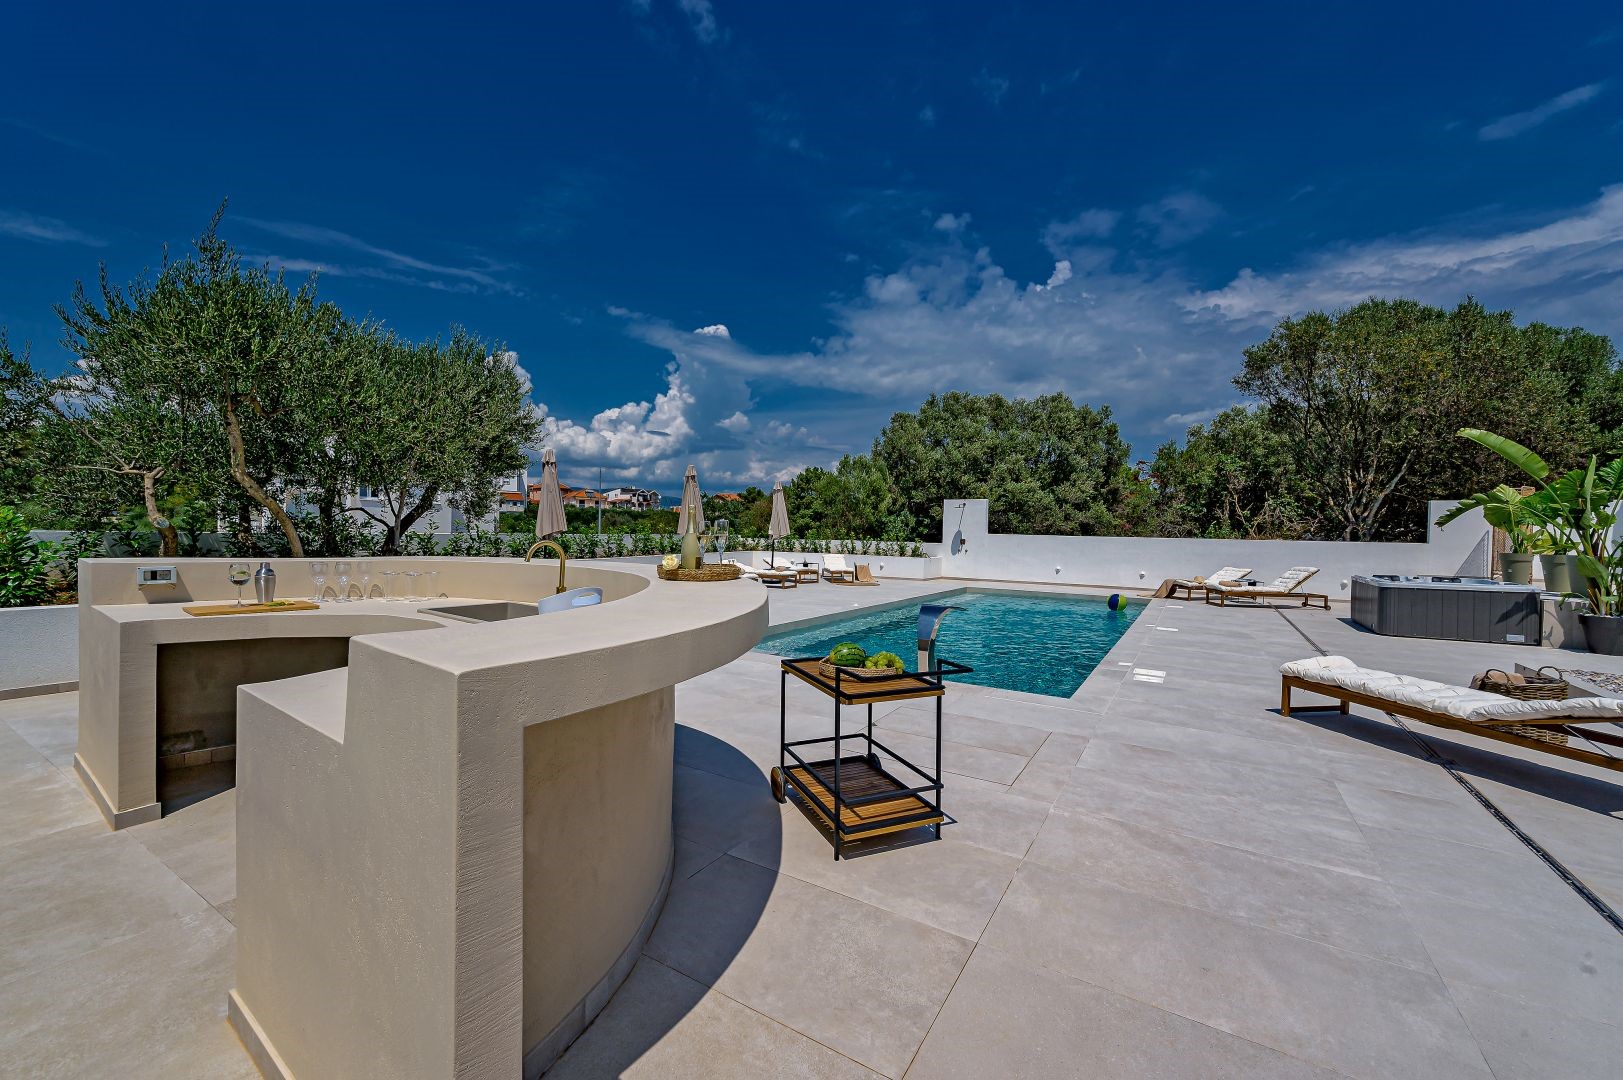 View of the summer kitchen and swimming pool surrounded by comfortable sunbeds and umbrellas on the property of the Croatian luxury villa for rent